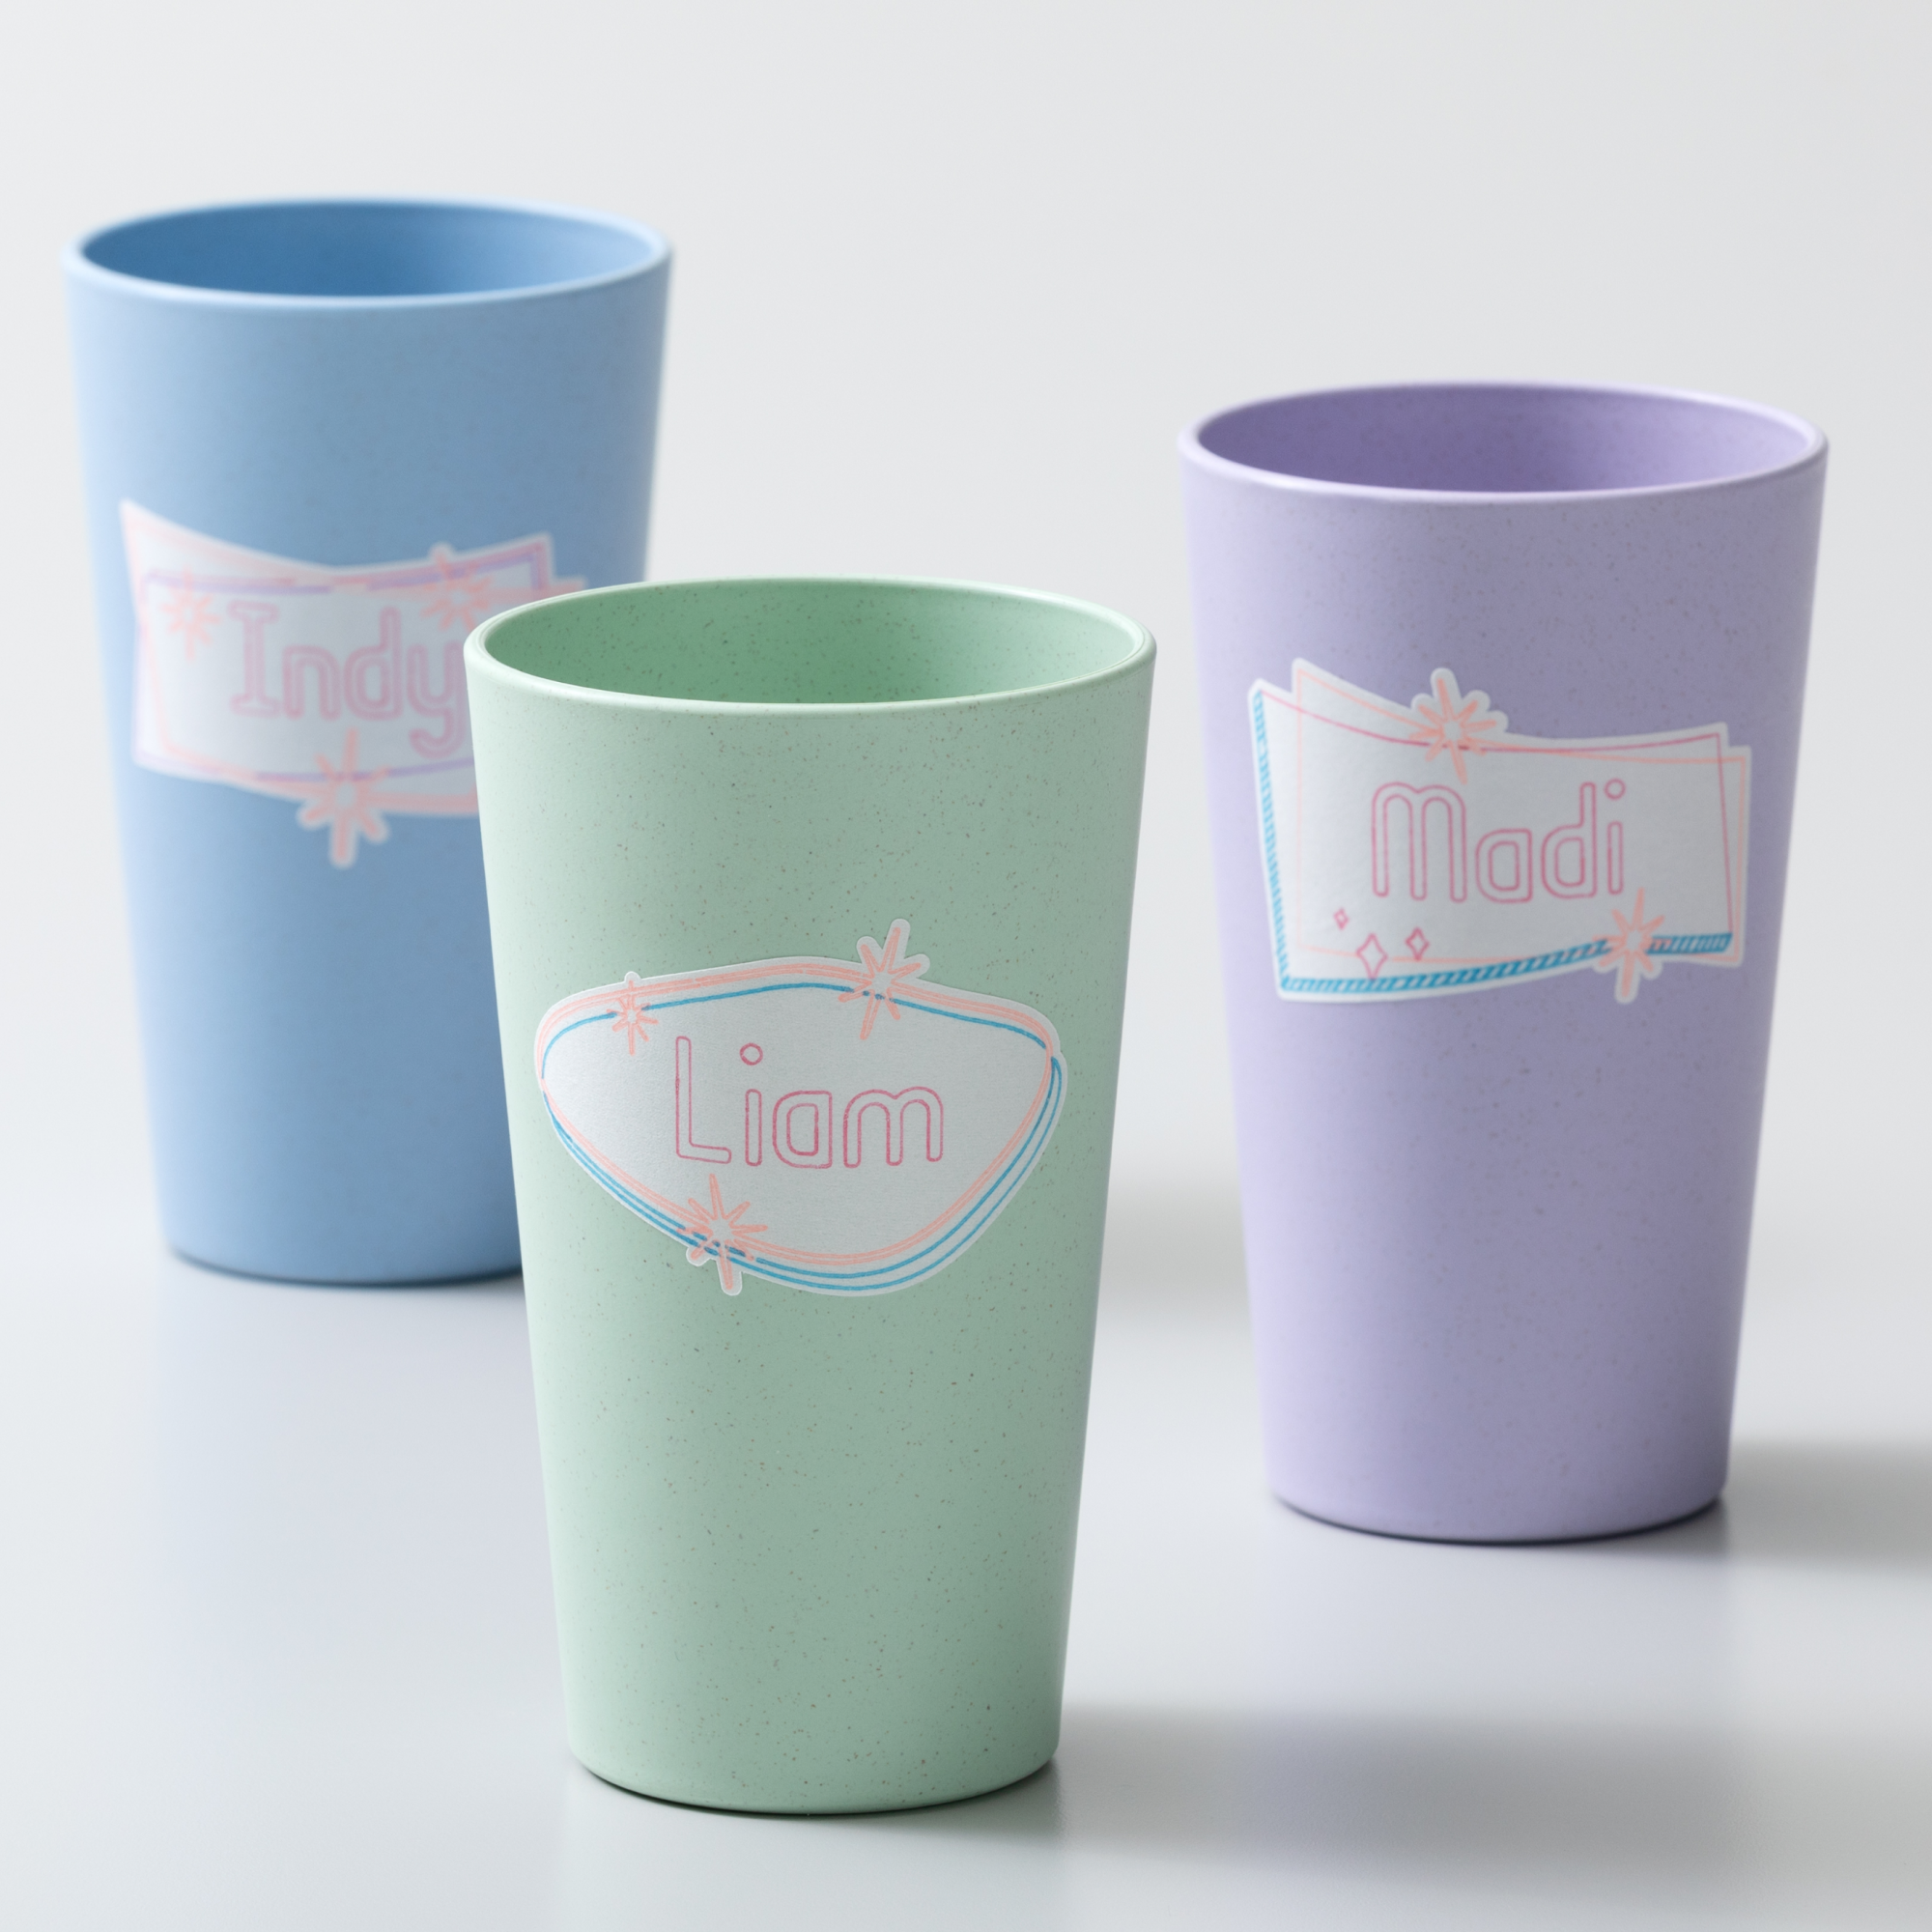 Cups with Smart Label Dissolvable Paper